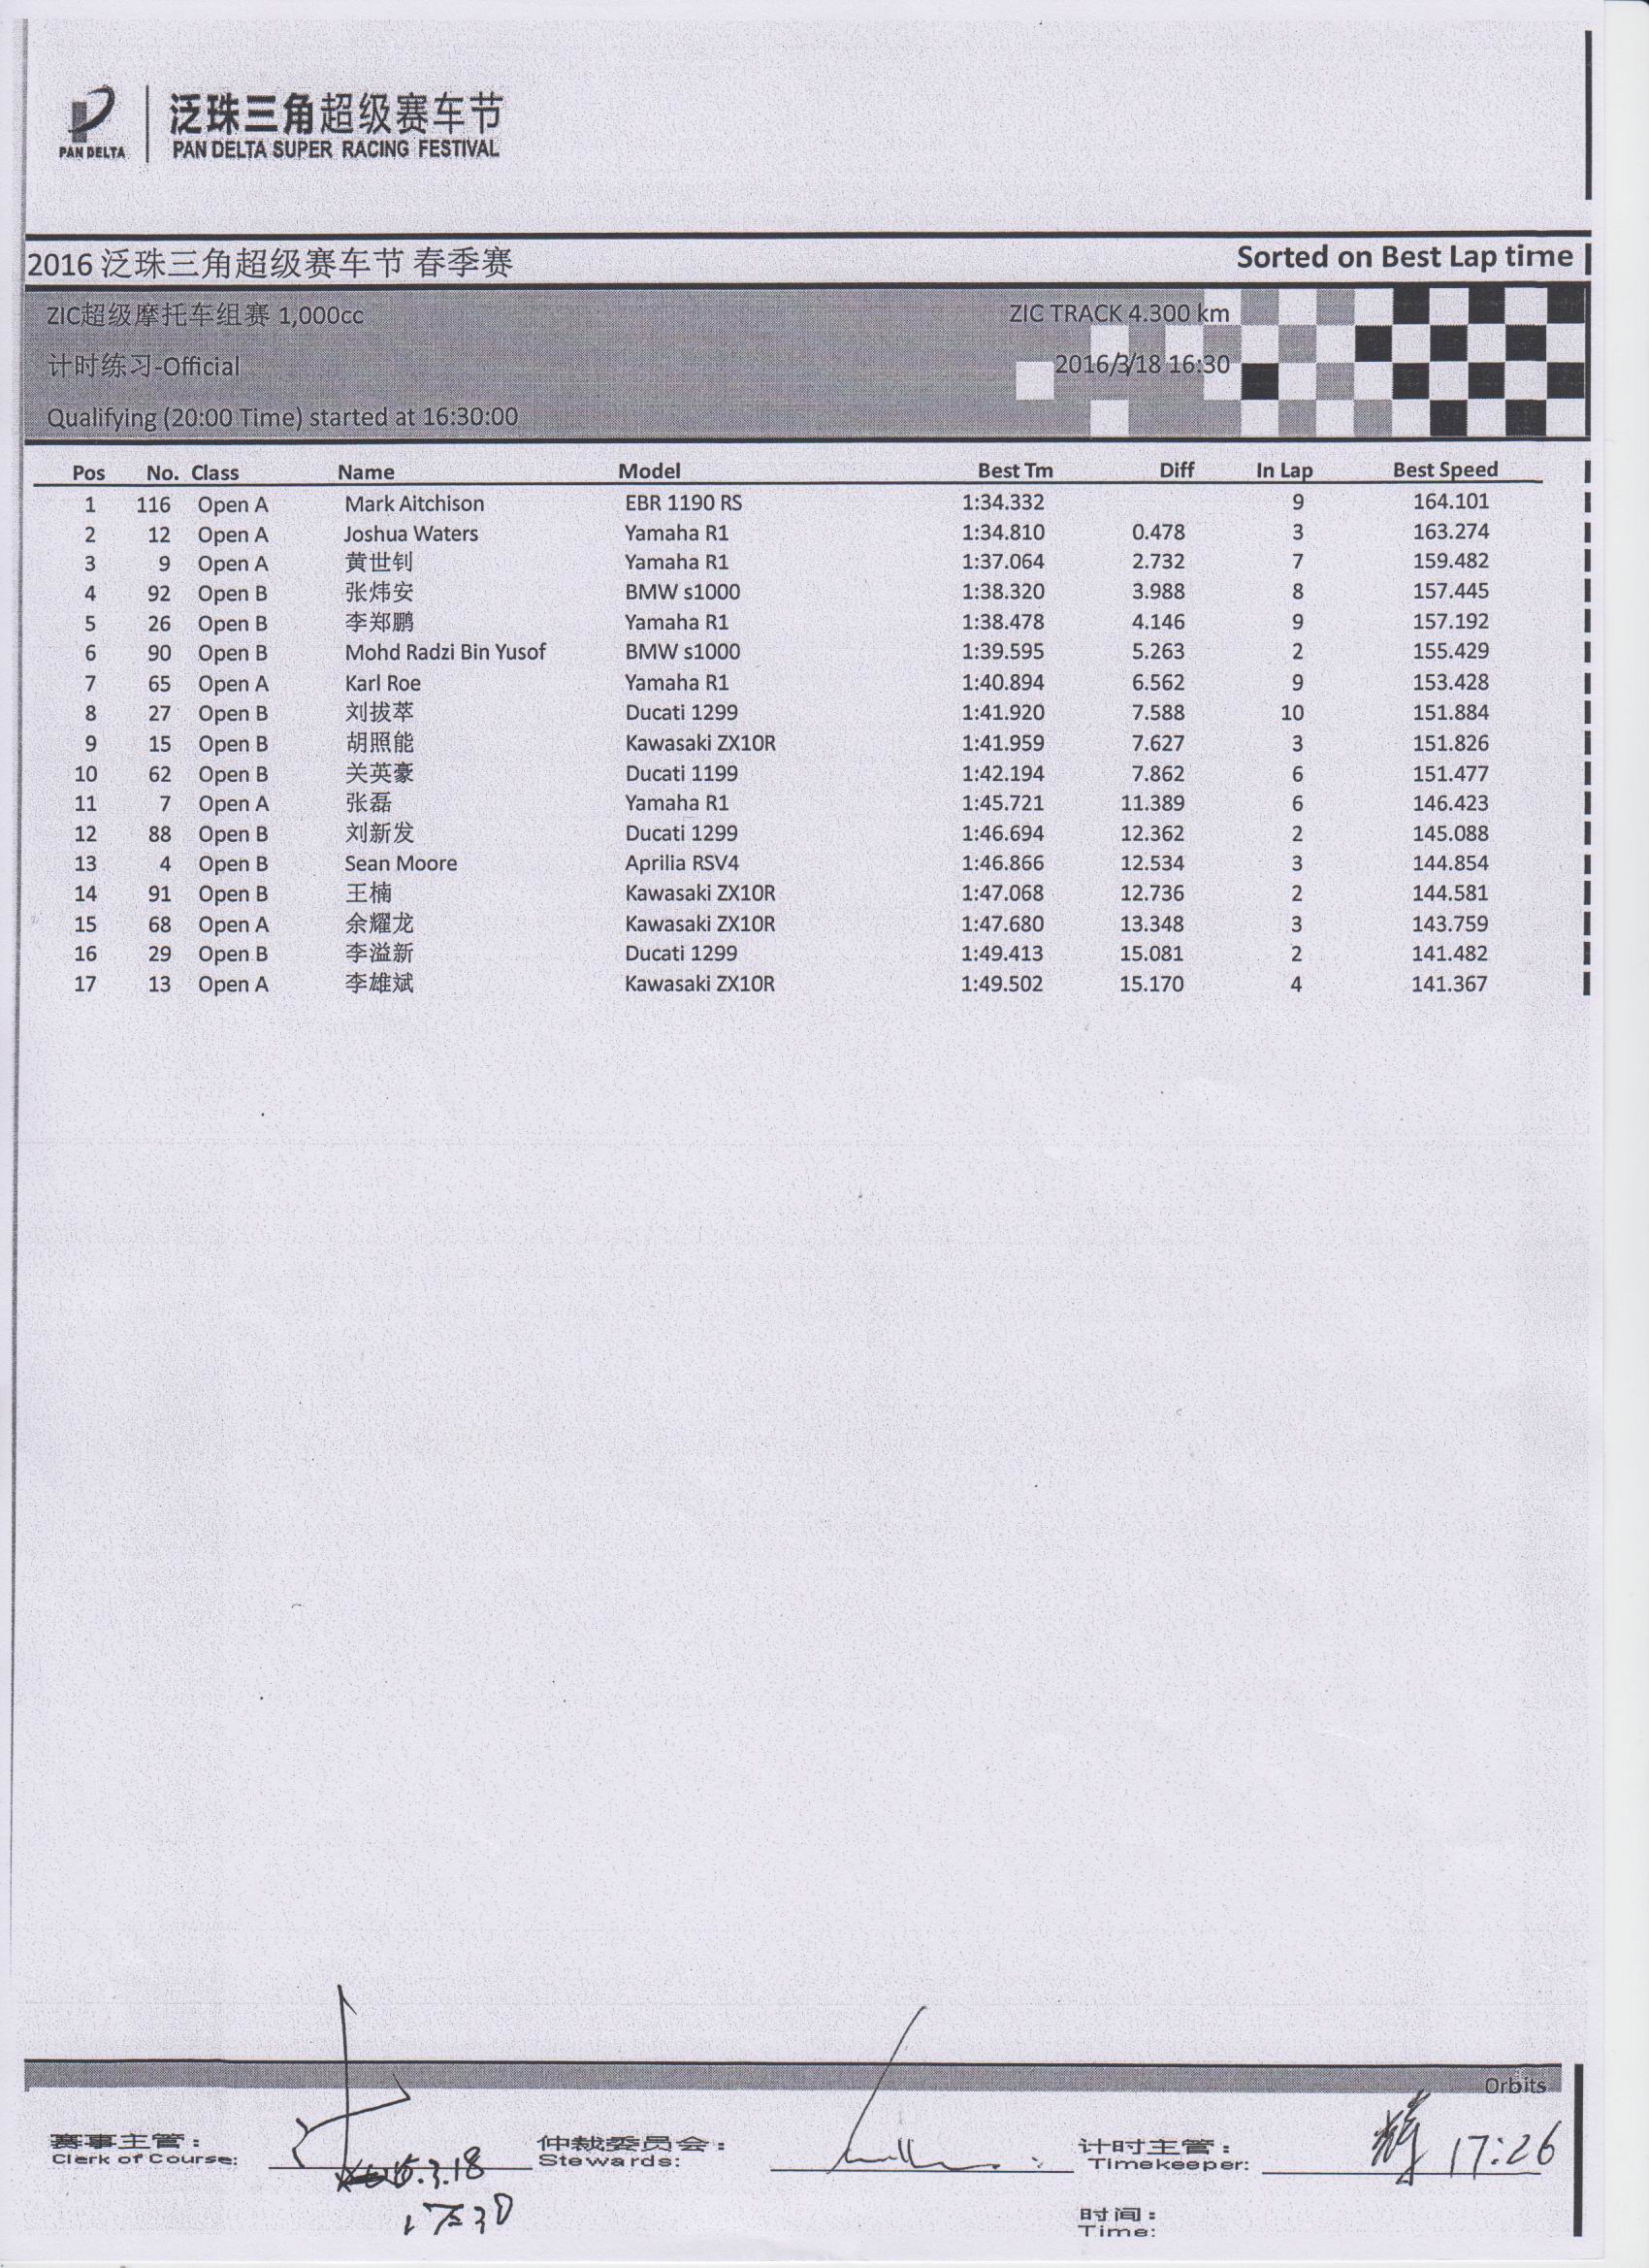 2016 PD1 ZIC Superbike 1000cc qualifying results